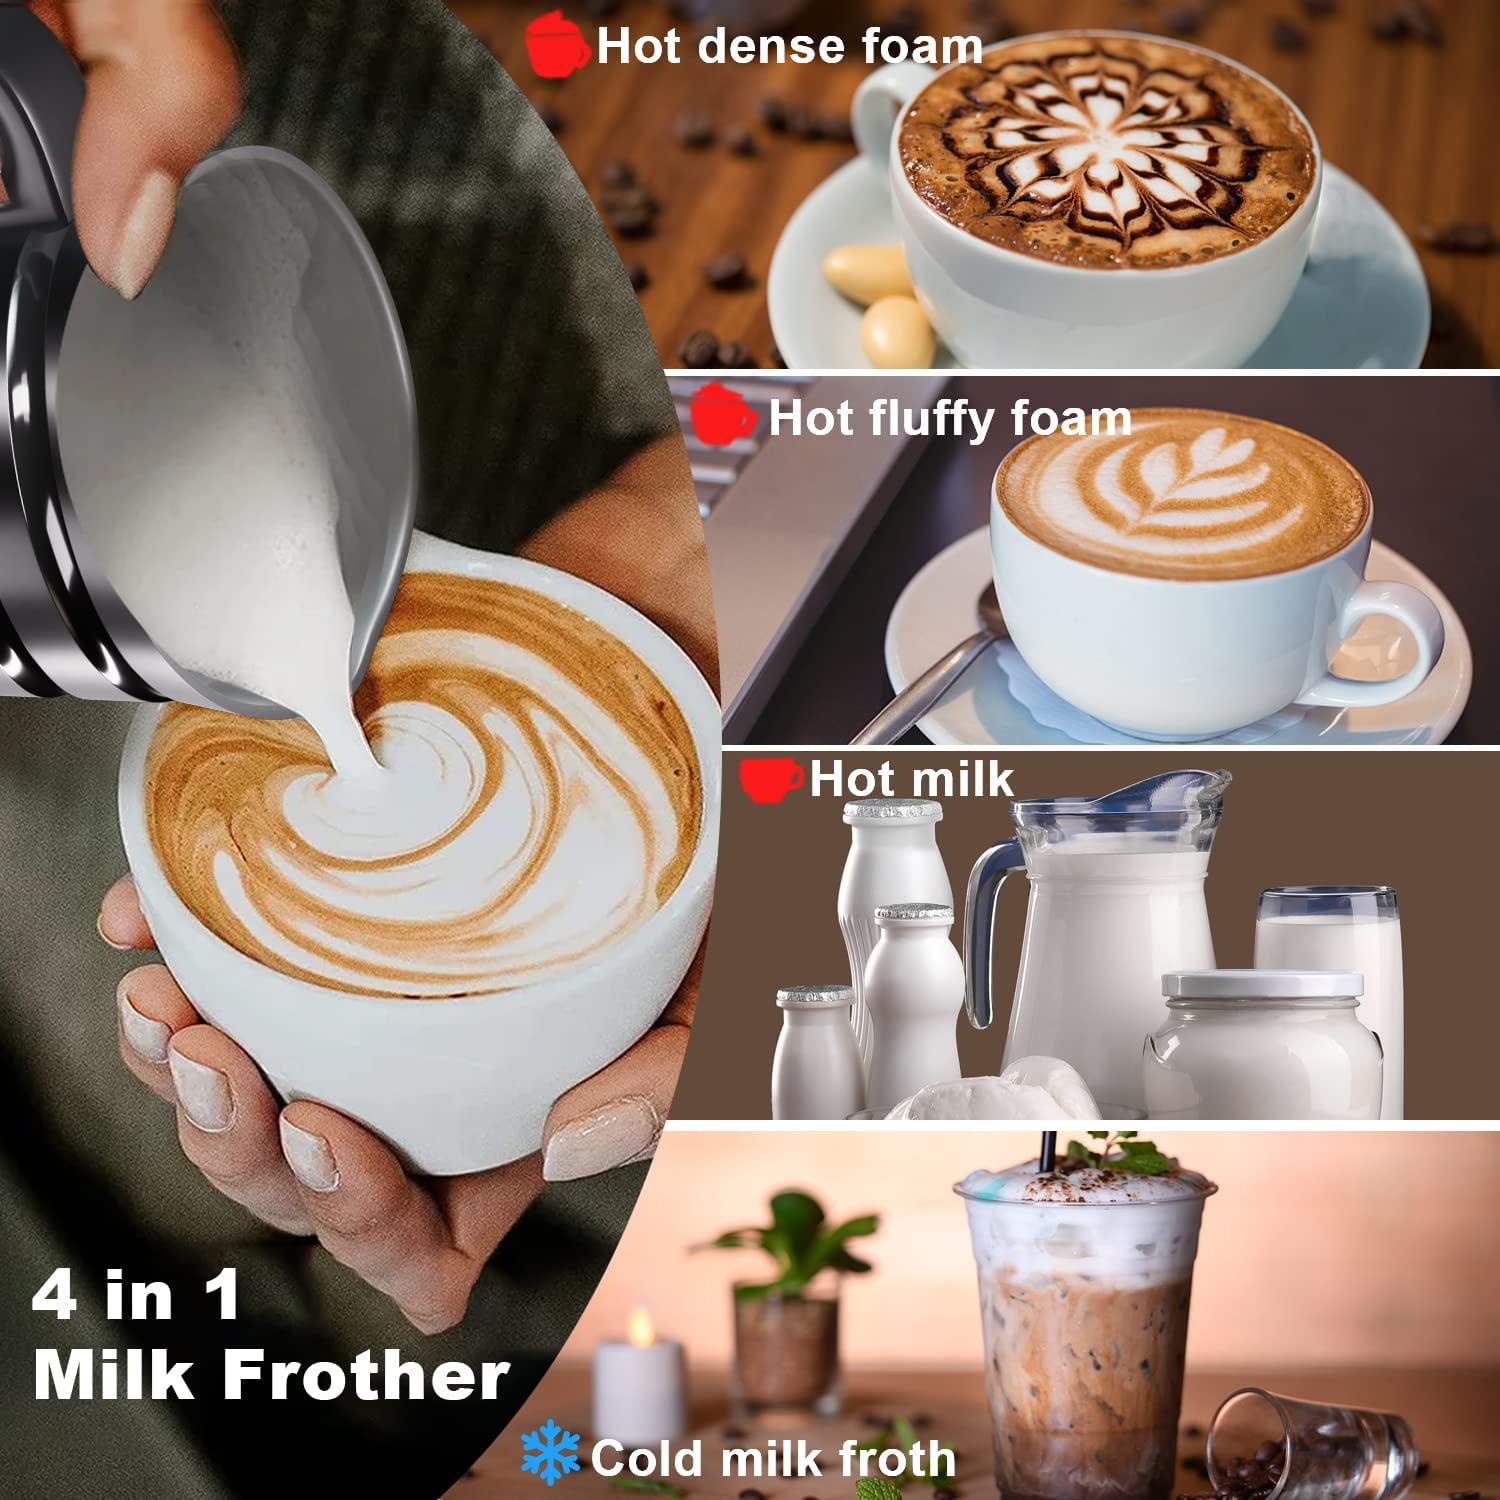 Gearup Milk Frother 4in1 Multifunction for Coffee, Detachable Electric Milk  Frother and Steamer, Soft Hot/Cold Foam, For Latte, Cappuccino, Macchiato 